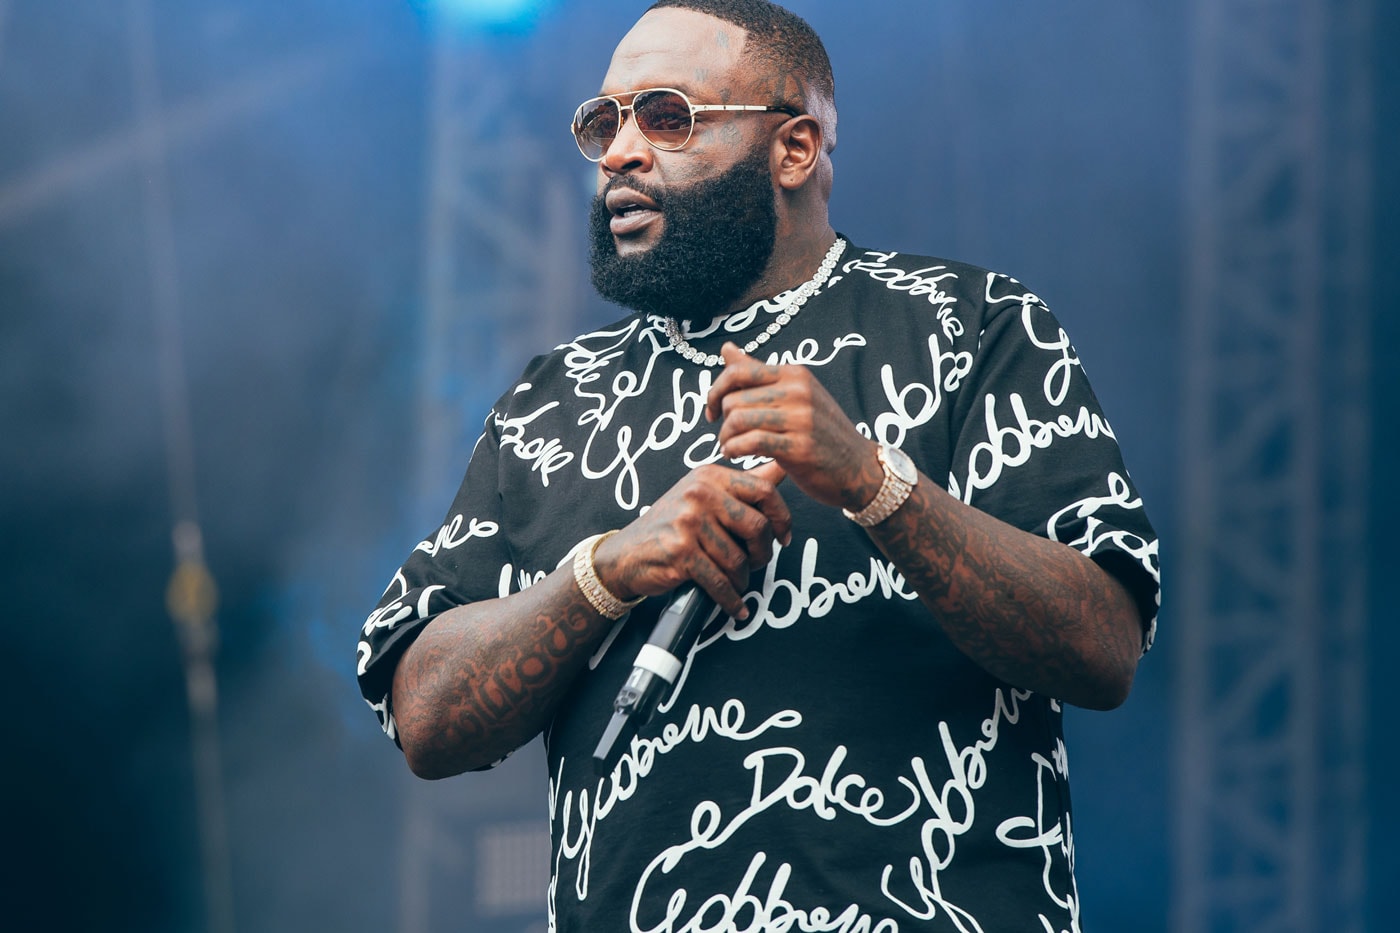 Rick Ross Confirms He Purchased a $1 Million USD Home Just So He "Can Ride by It Every Day" atlanta rapper producer hip hop biggest boss aston martin music